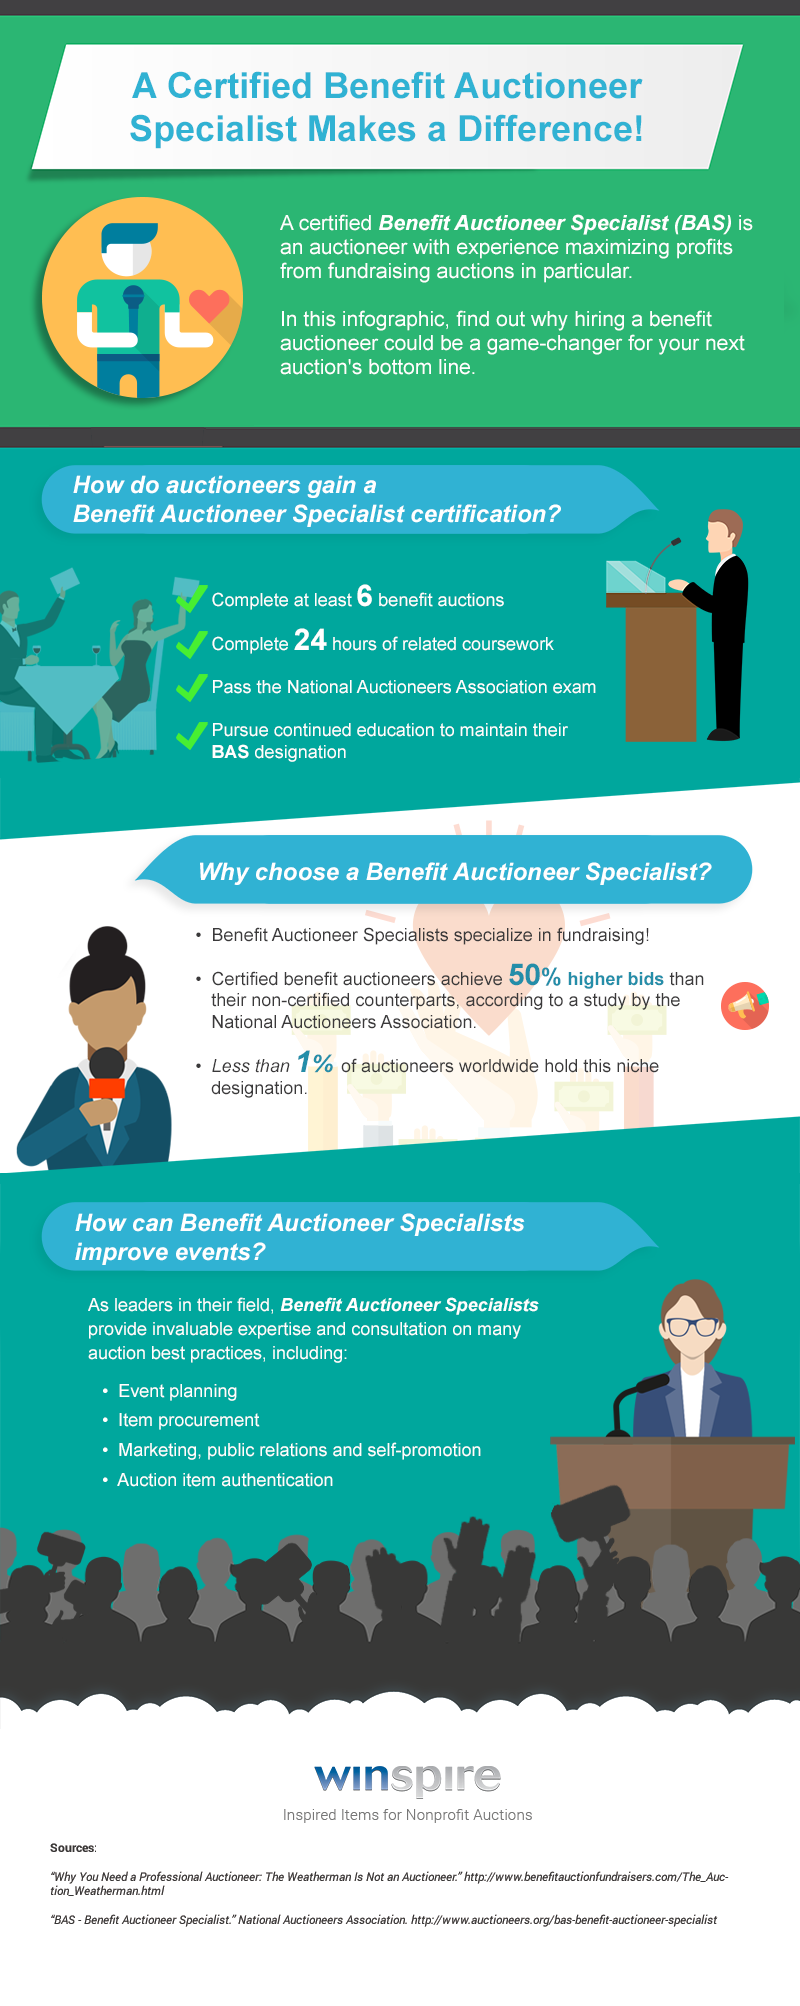 Certified Benefit Auctioneer Specialists Make a Difference - Infographic